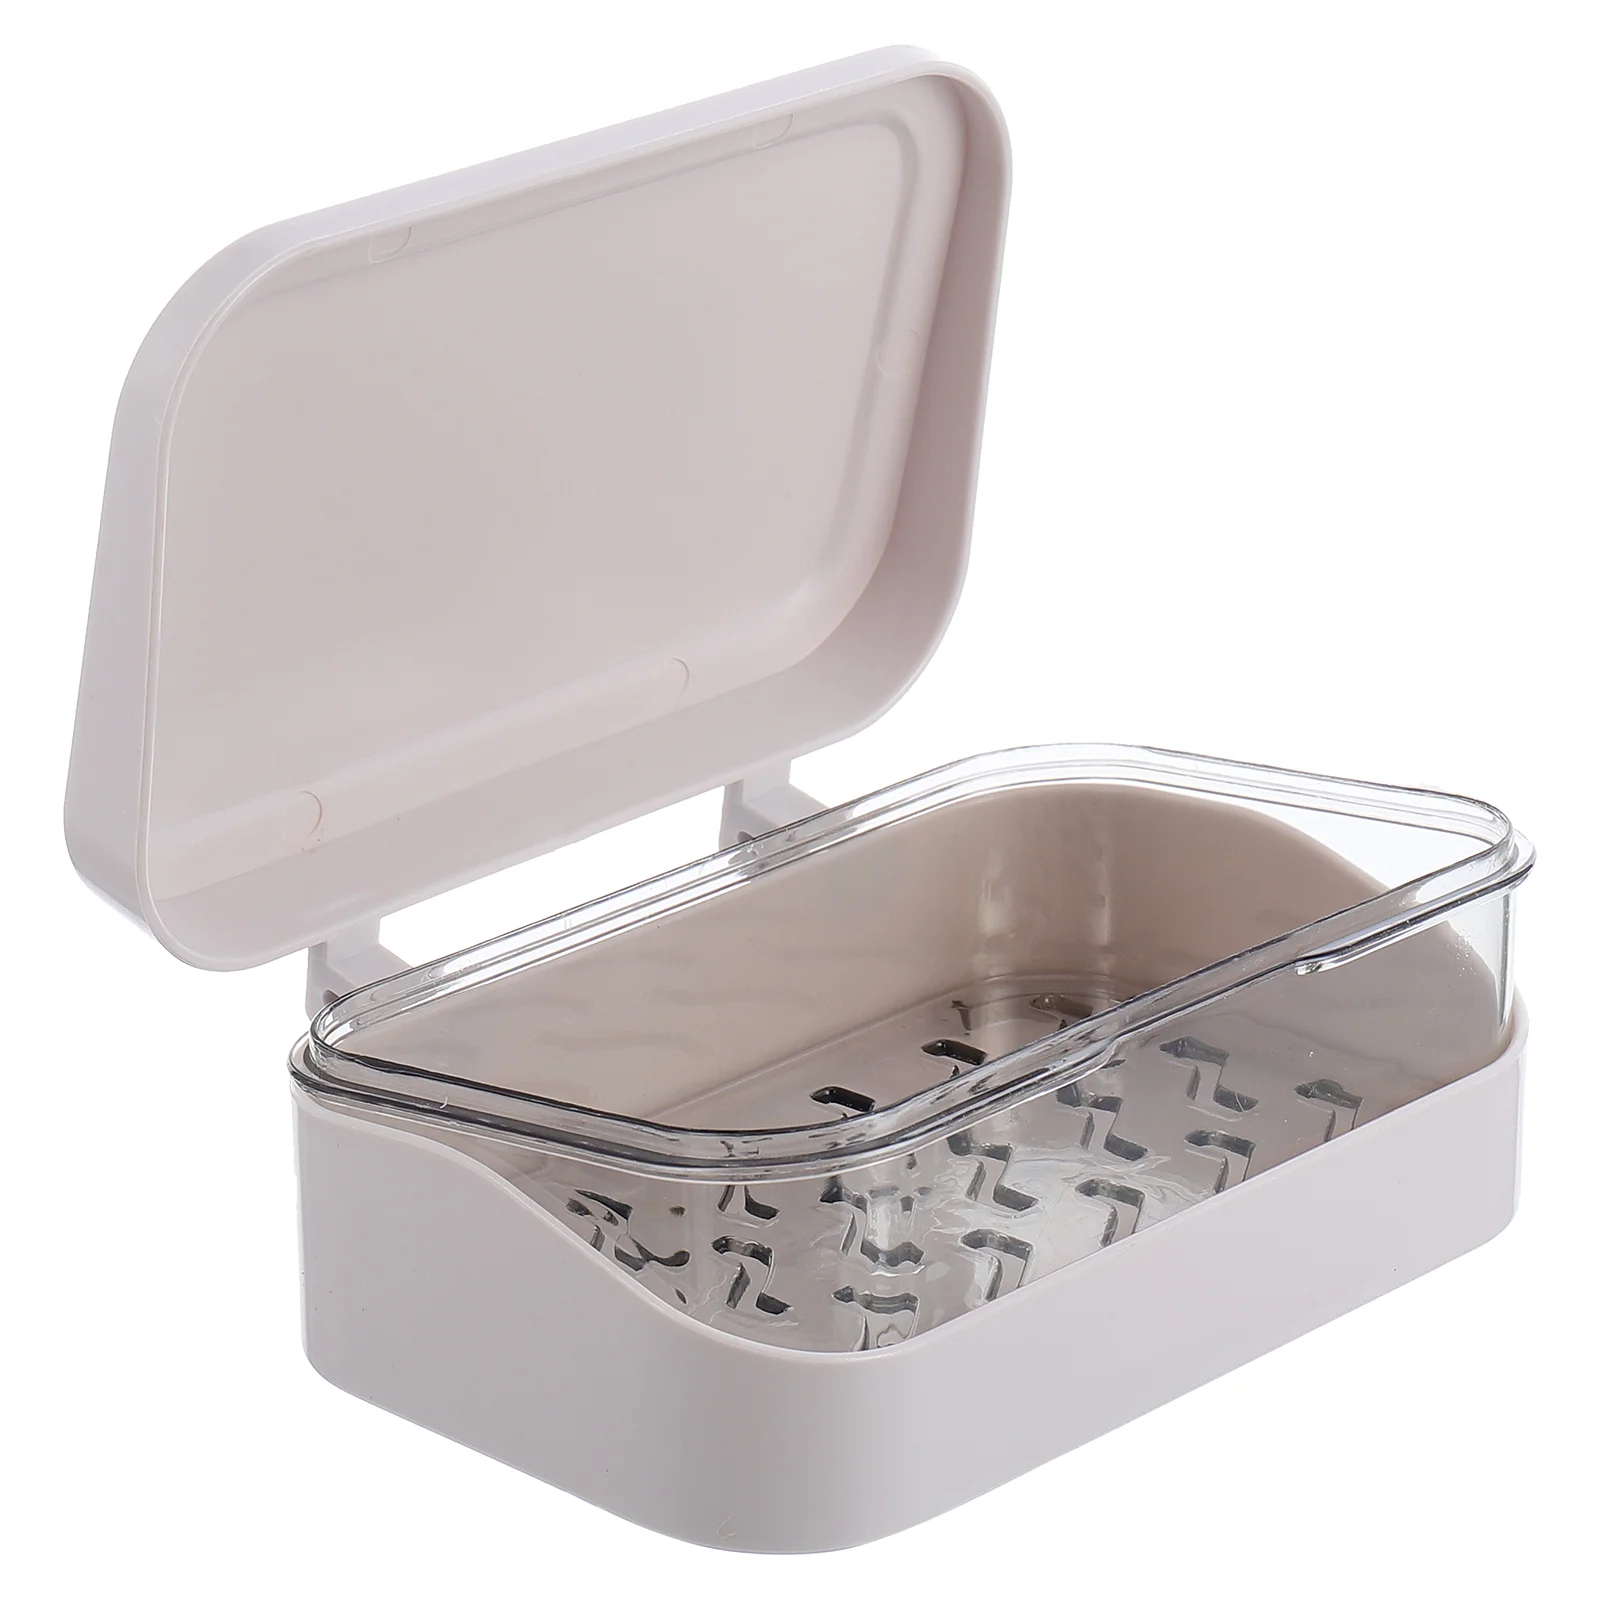 

Dish Holder Soap Saver Drain Soap Box Soap Box Lid Travel Soap Container Draining Soap Case Containers Lids Soap Tray